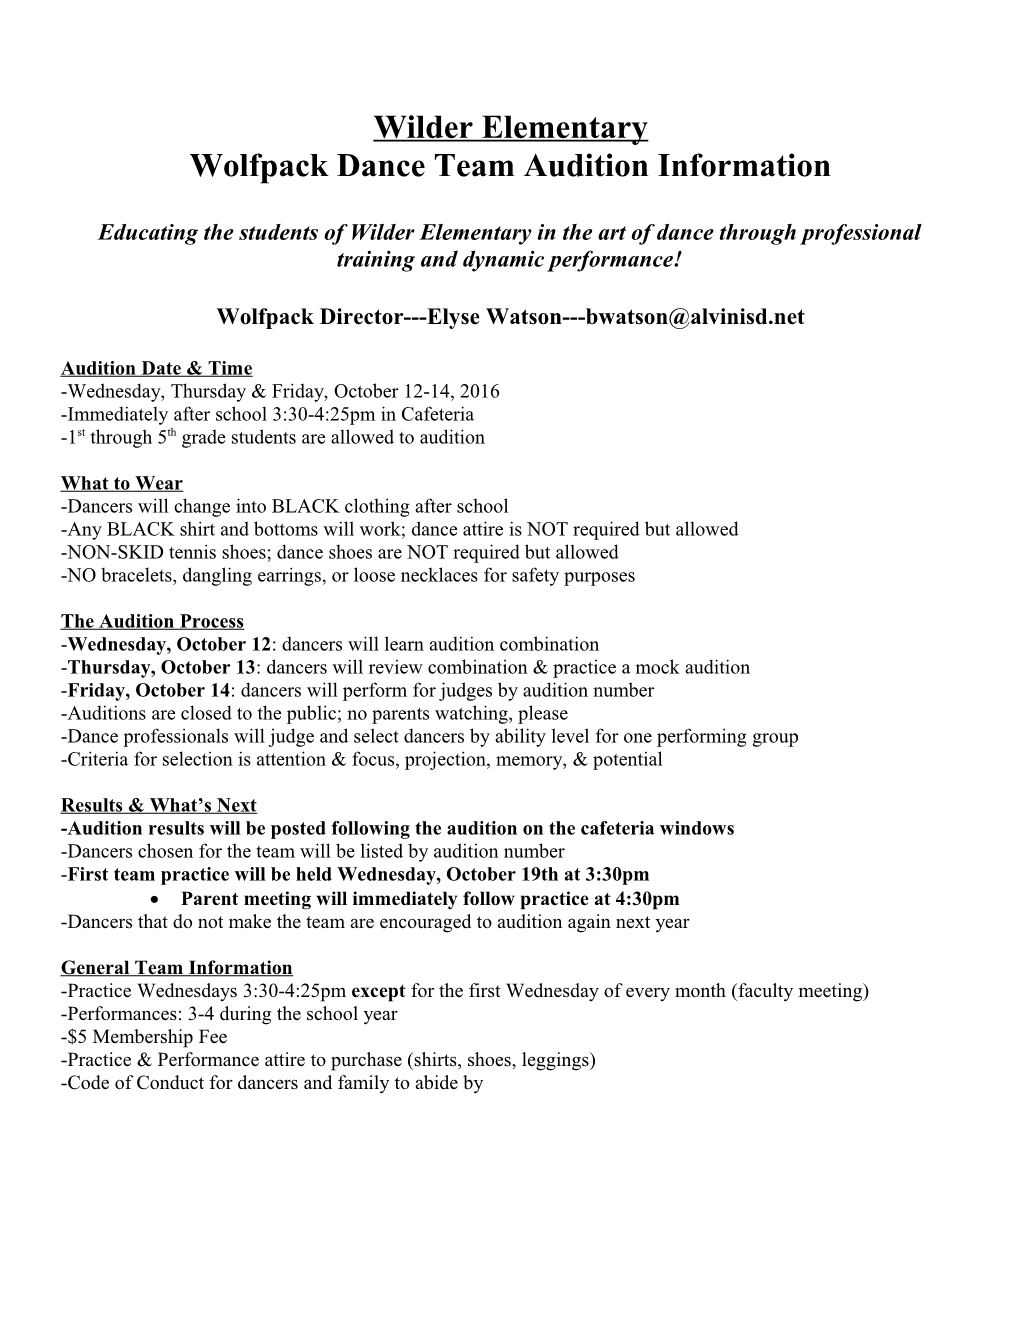 Wolfpack Dance Team Audition Information